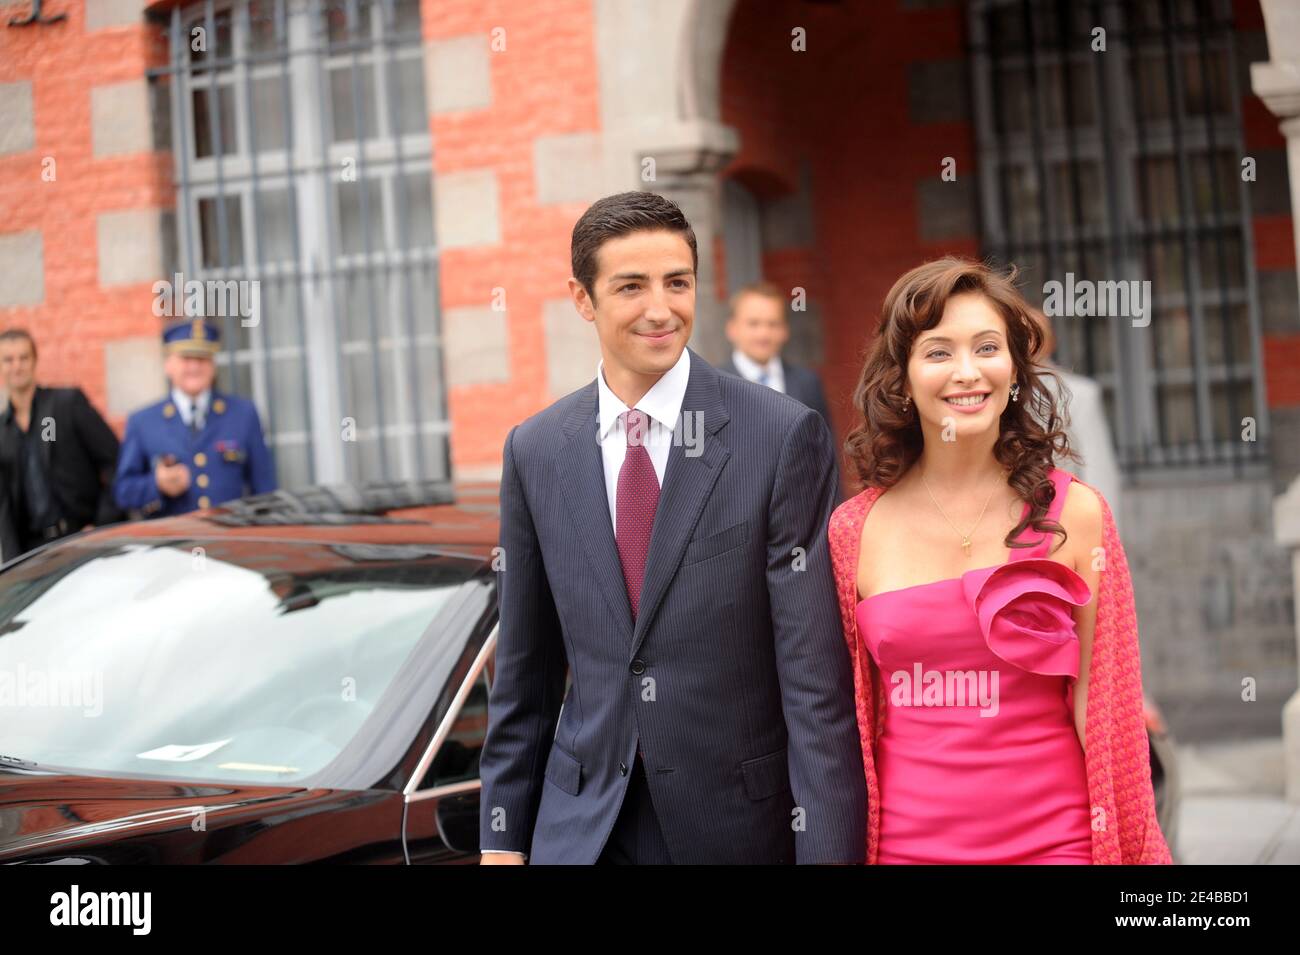 Wedding at the city hall of the Prince de Ligne Edouard Lamoral Rodolphe de  Ligne la Tremoille and the italian actress Isabella Orsini in Antoing,  Belgium on September 2, 2009. Photo by